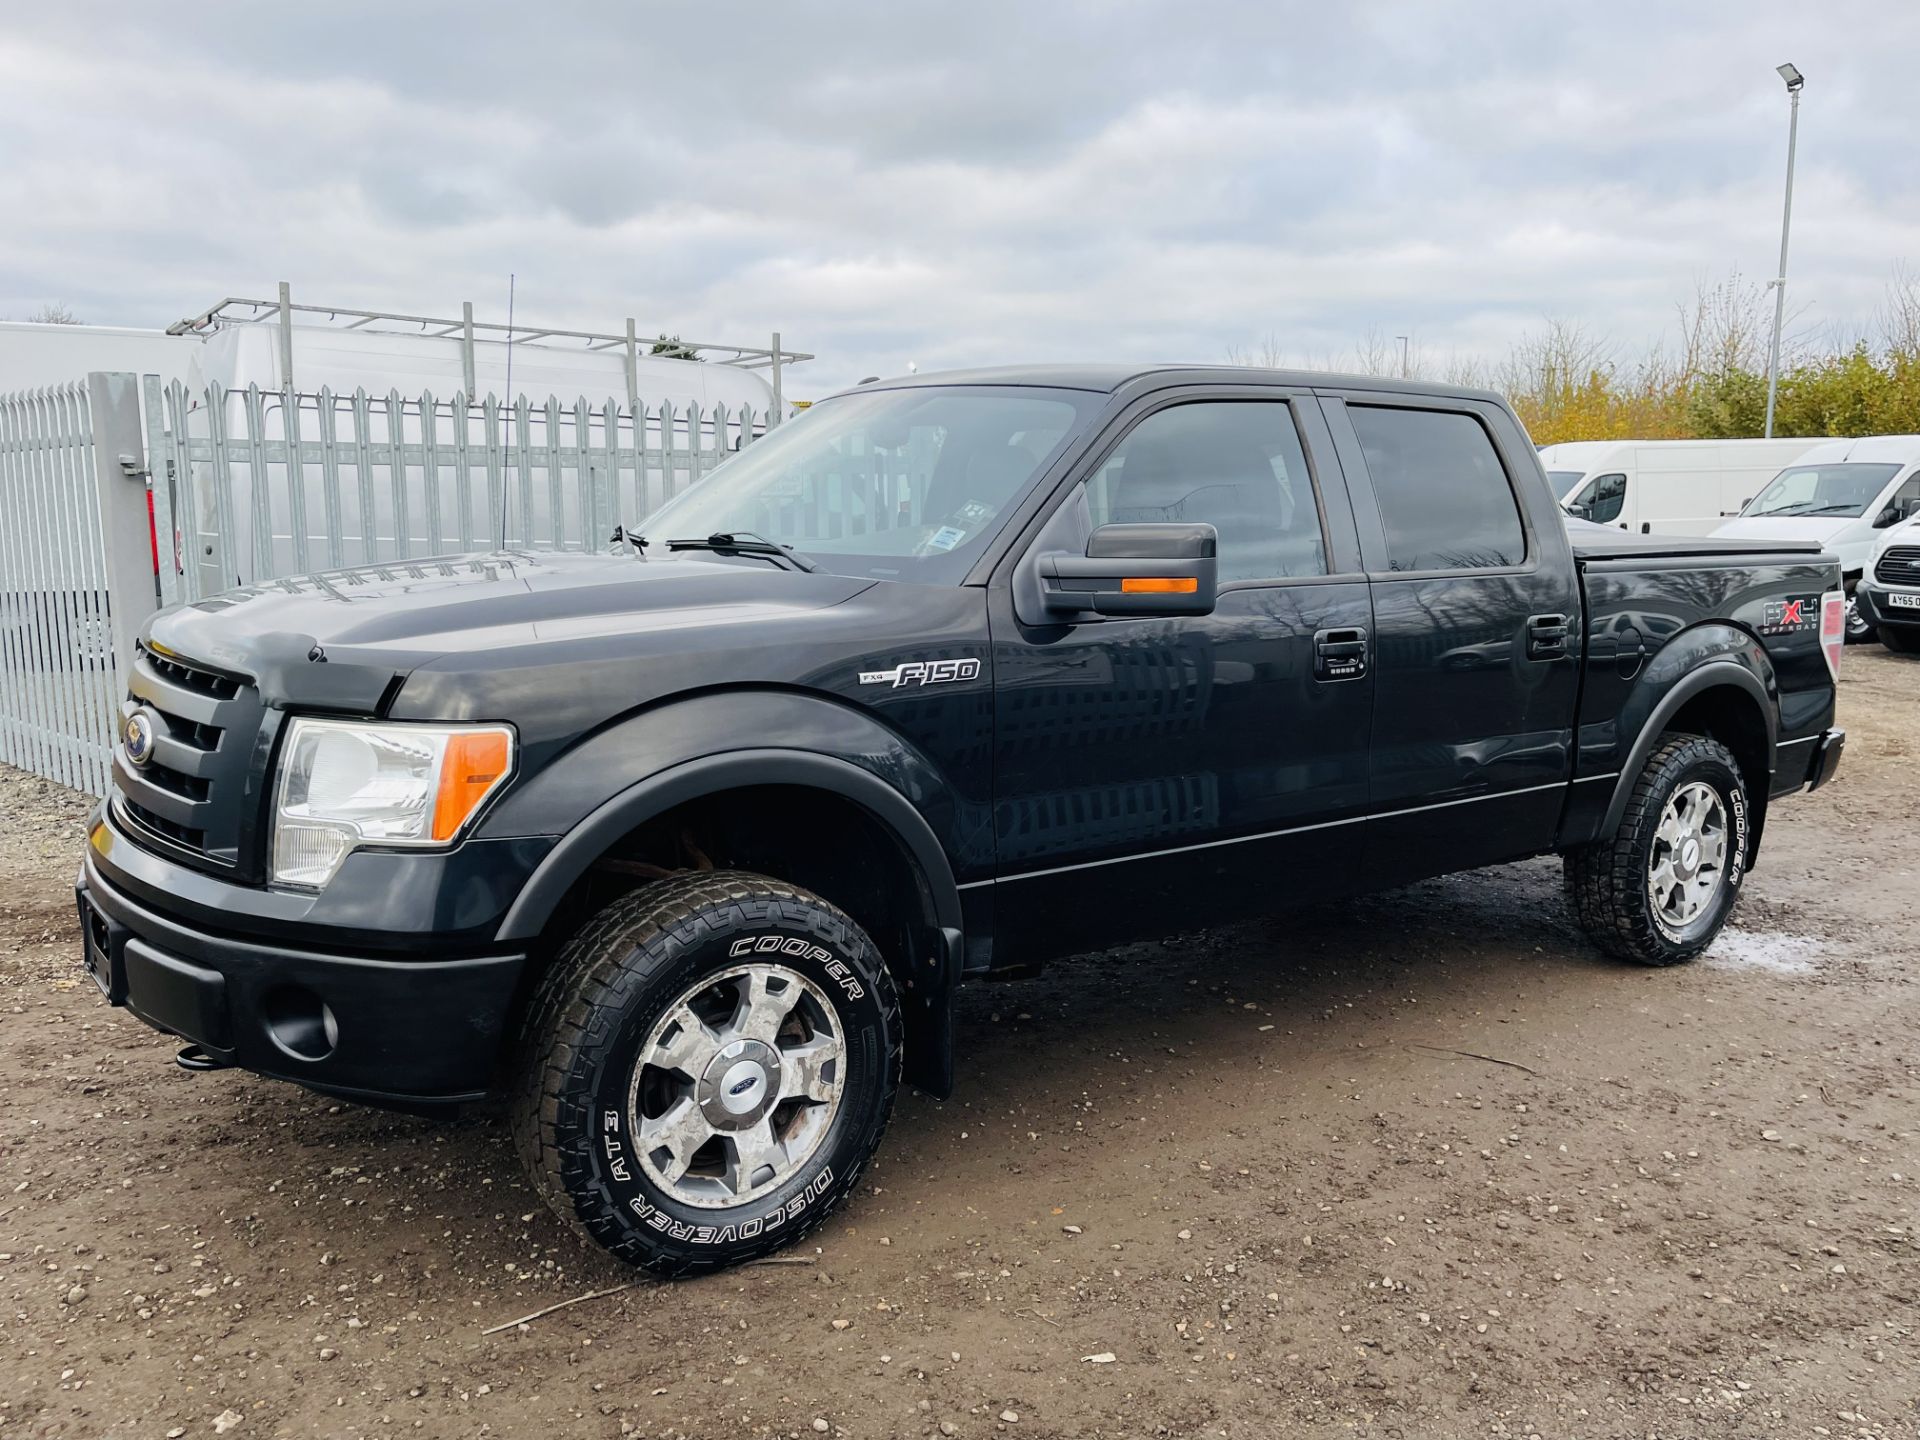 Ford F-150 3.5L V6 SuperCab 4WD FX4 Edition '2010 Year' Colour Coded Package - Top Spec - Image 3 of 24